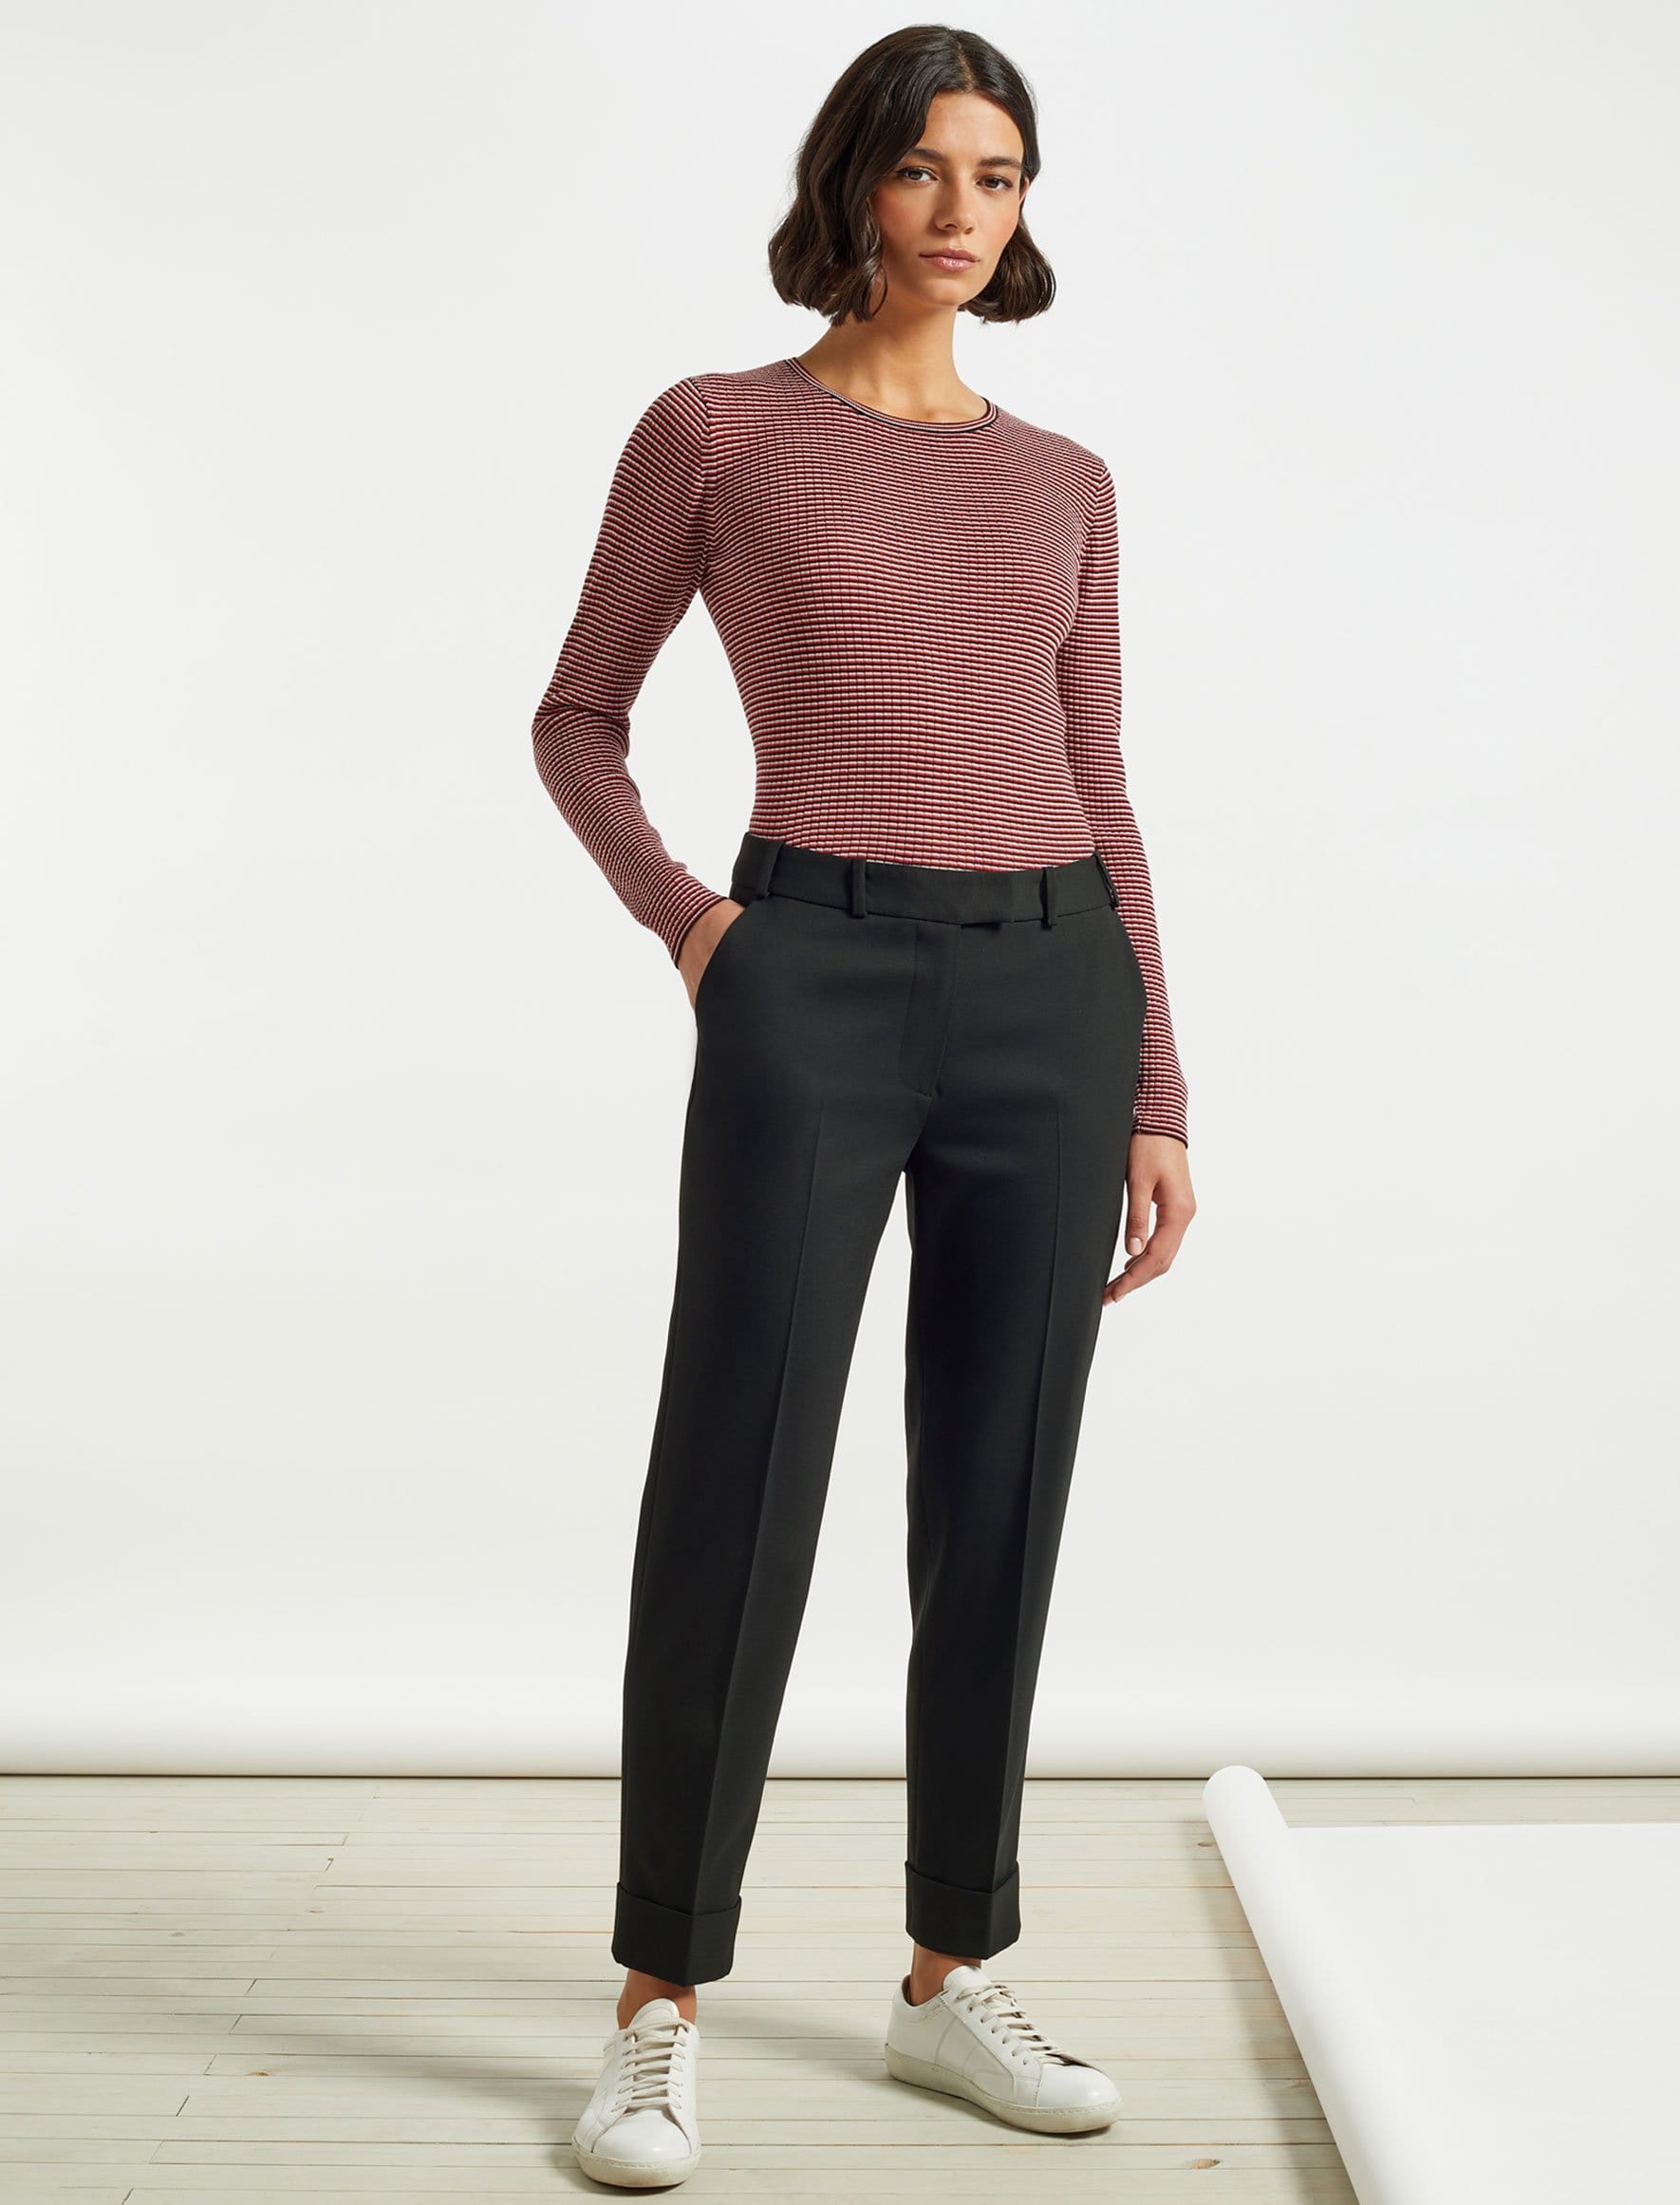 Clement Turn Up Wool Blend Trousers - Black | Womens Wool Trousers ...